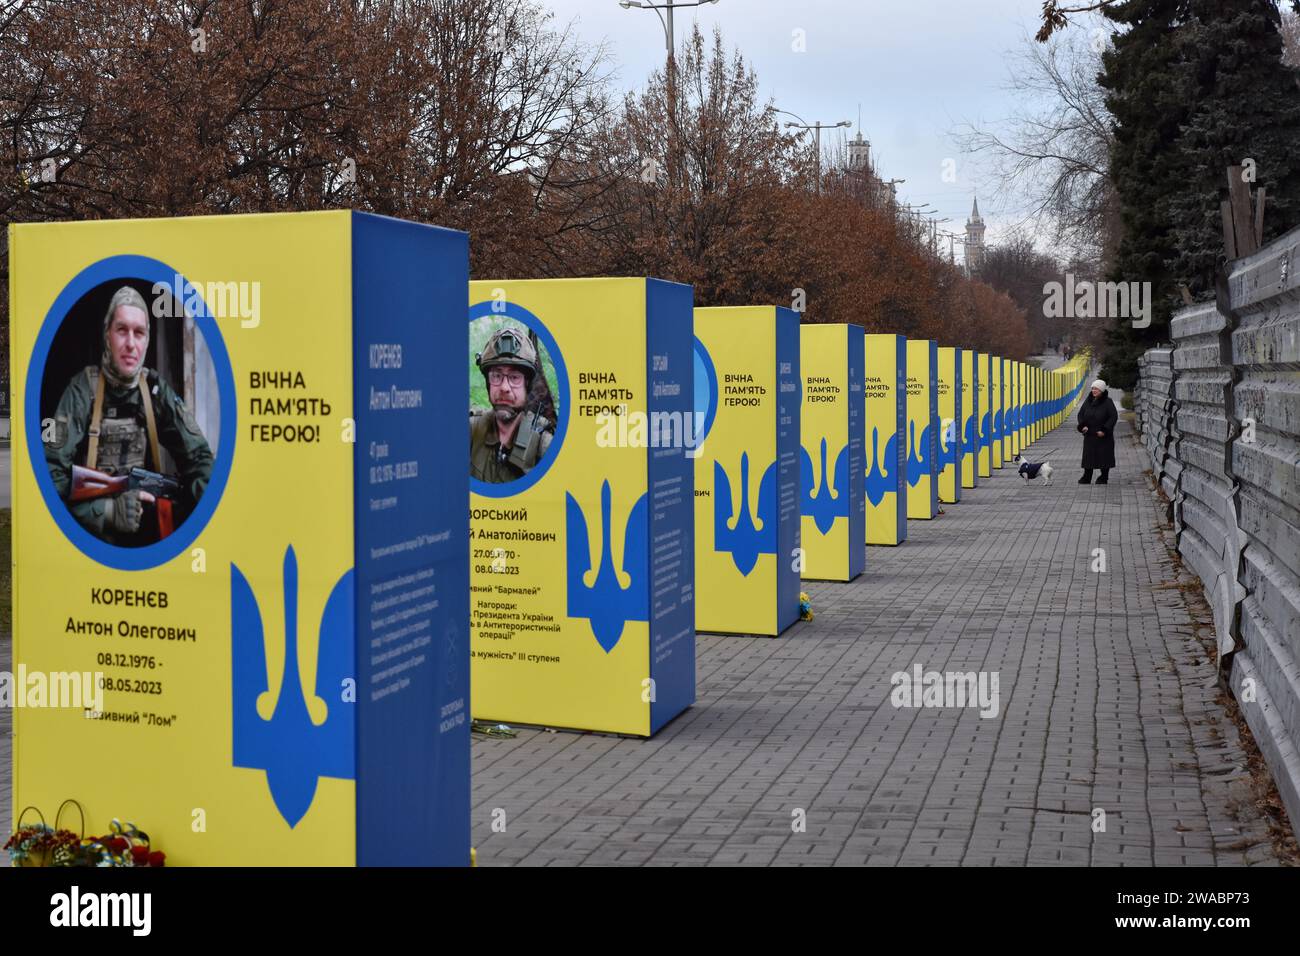 A woman with a dog walks past stands of portraits of fallen Ukrainian soldiers in the center of Zaporizhzhia. Ukrainian President Volodymyr Zelenskiy said Russian forces are suffering heavy losses and the notion that Moscow is winning the nearly two-year-old war is only a 'feeling' not based on reality. There was no response to a request for comment from Russian officials on Zelenskiy's remarks. Russian officials have said Western estimates of Russian death tolls are vastly exaggerated and almost always underestimate Ukrainian losses. Stock Photo